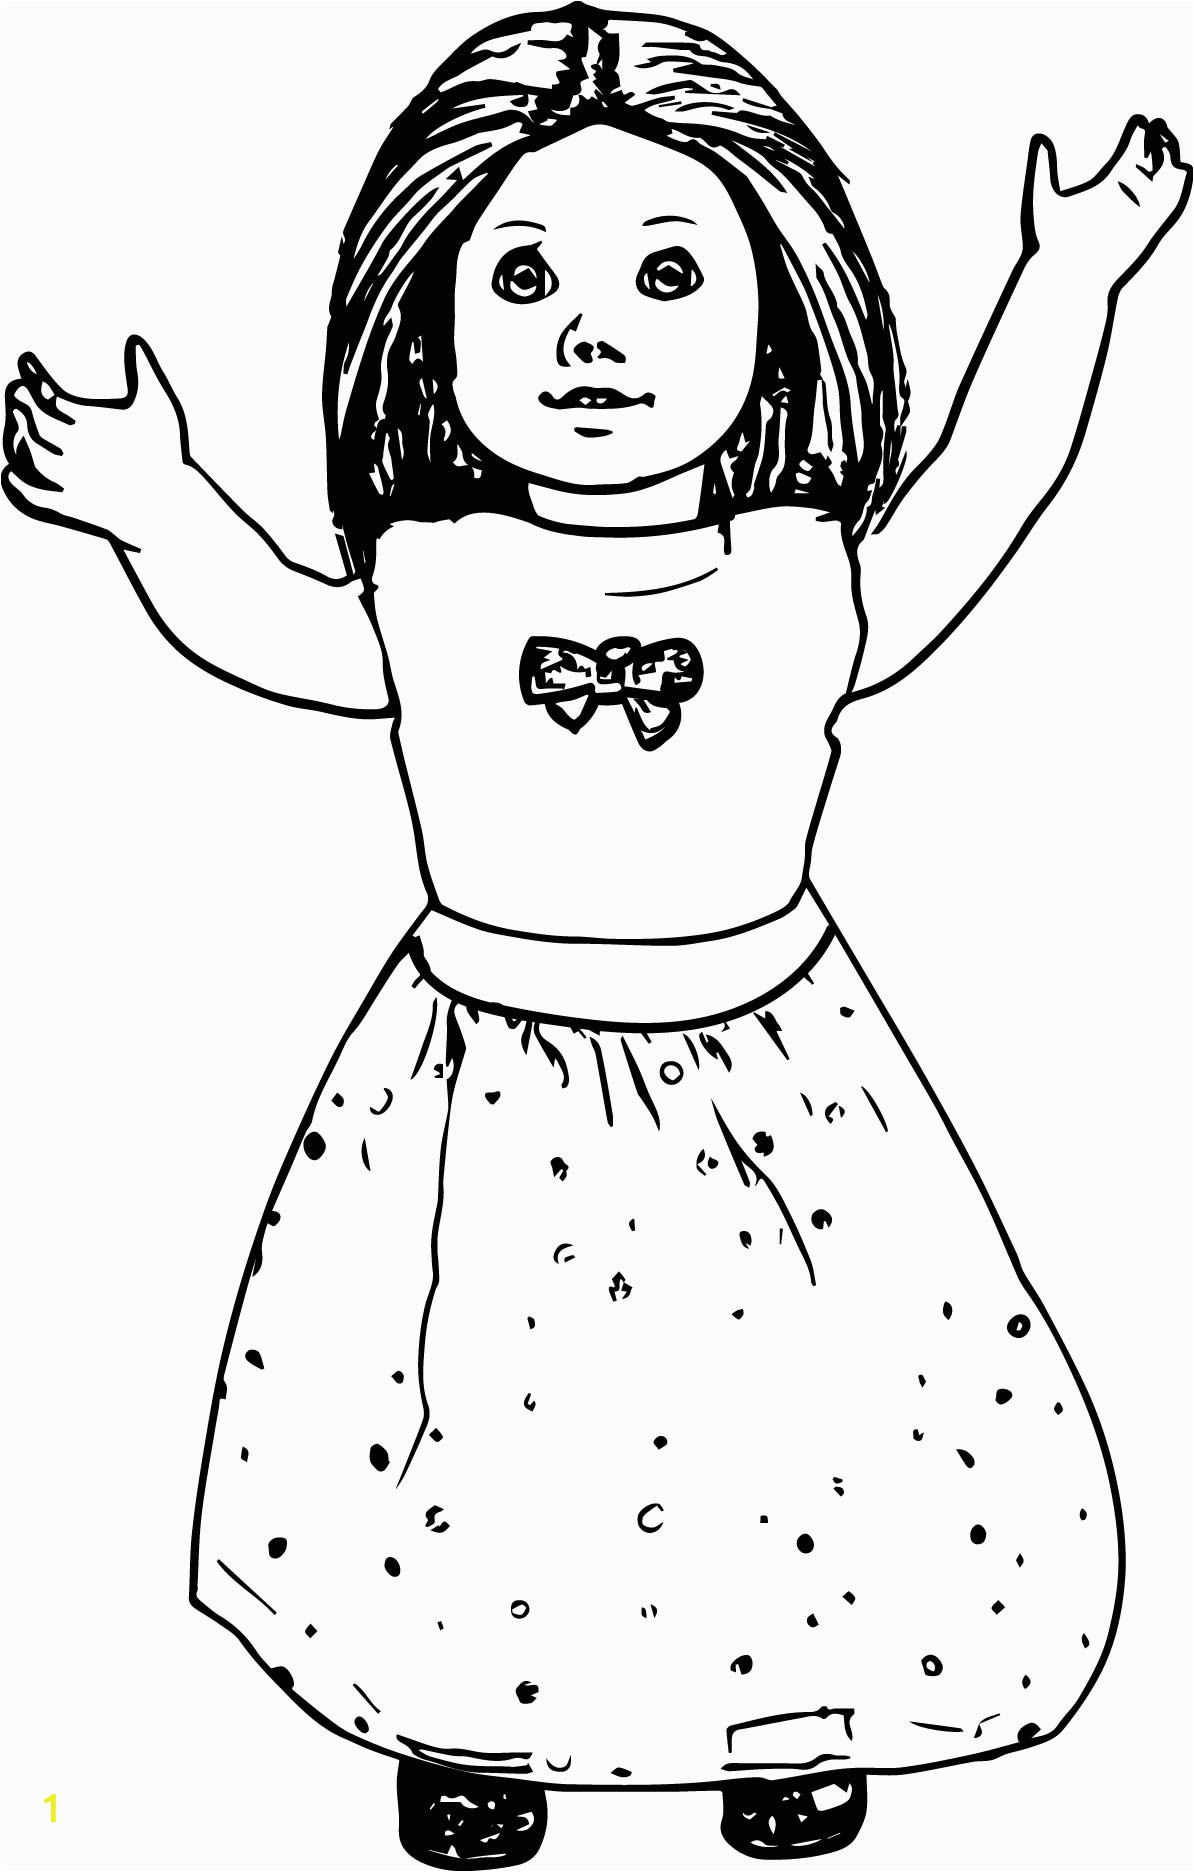 American Girl Doll Coloring Pages to Print American Girl Coloring Pages Best Coloring Pages for Kids